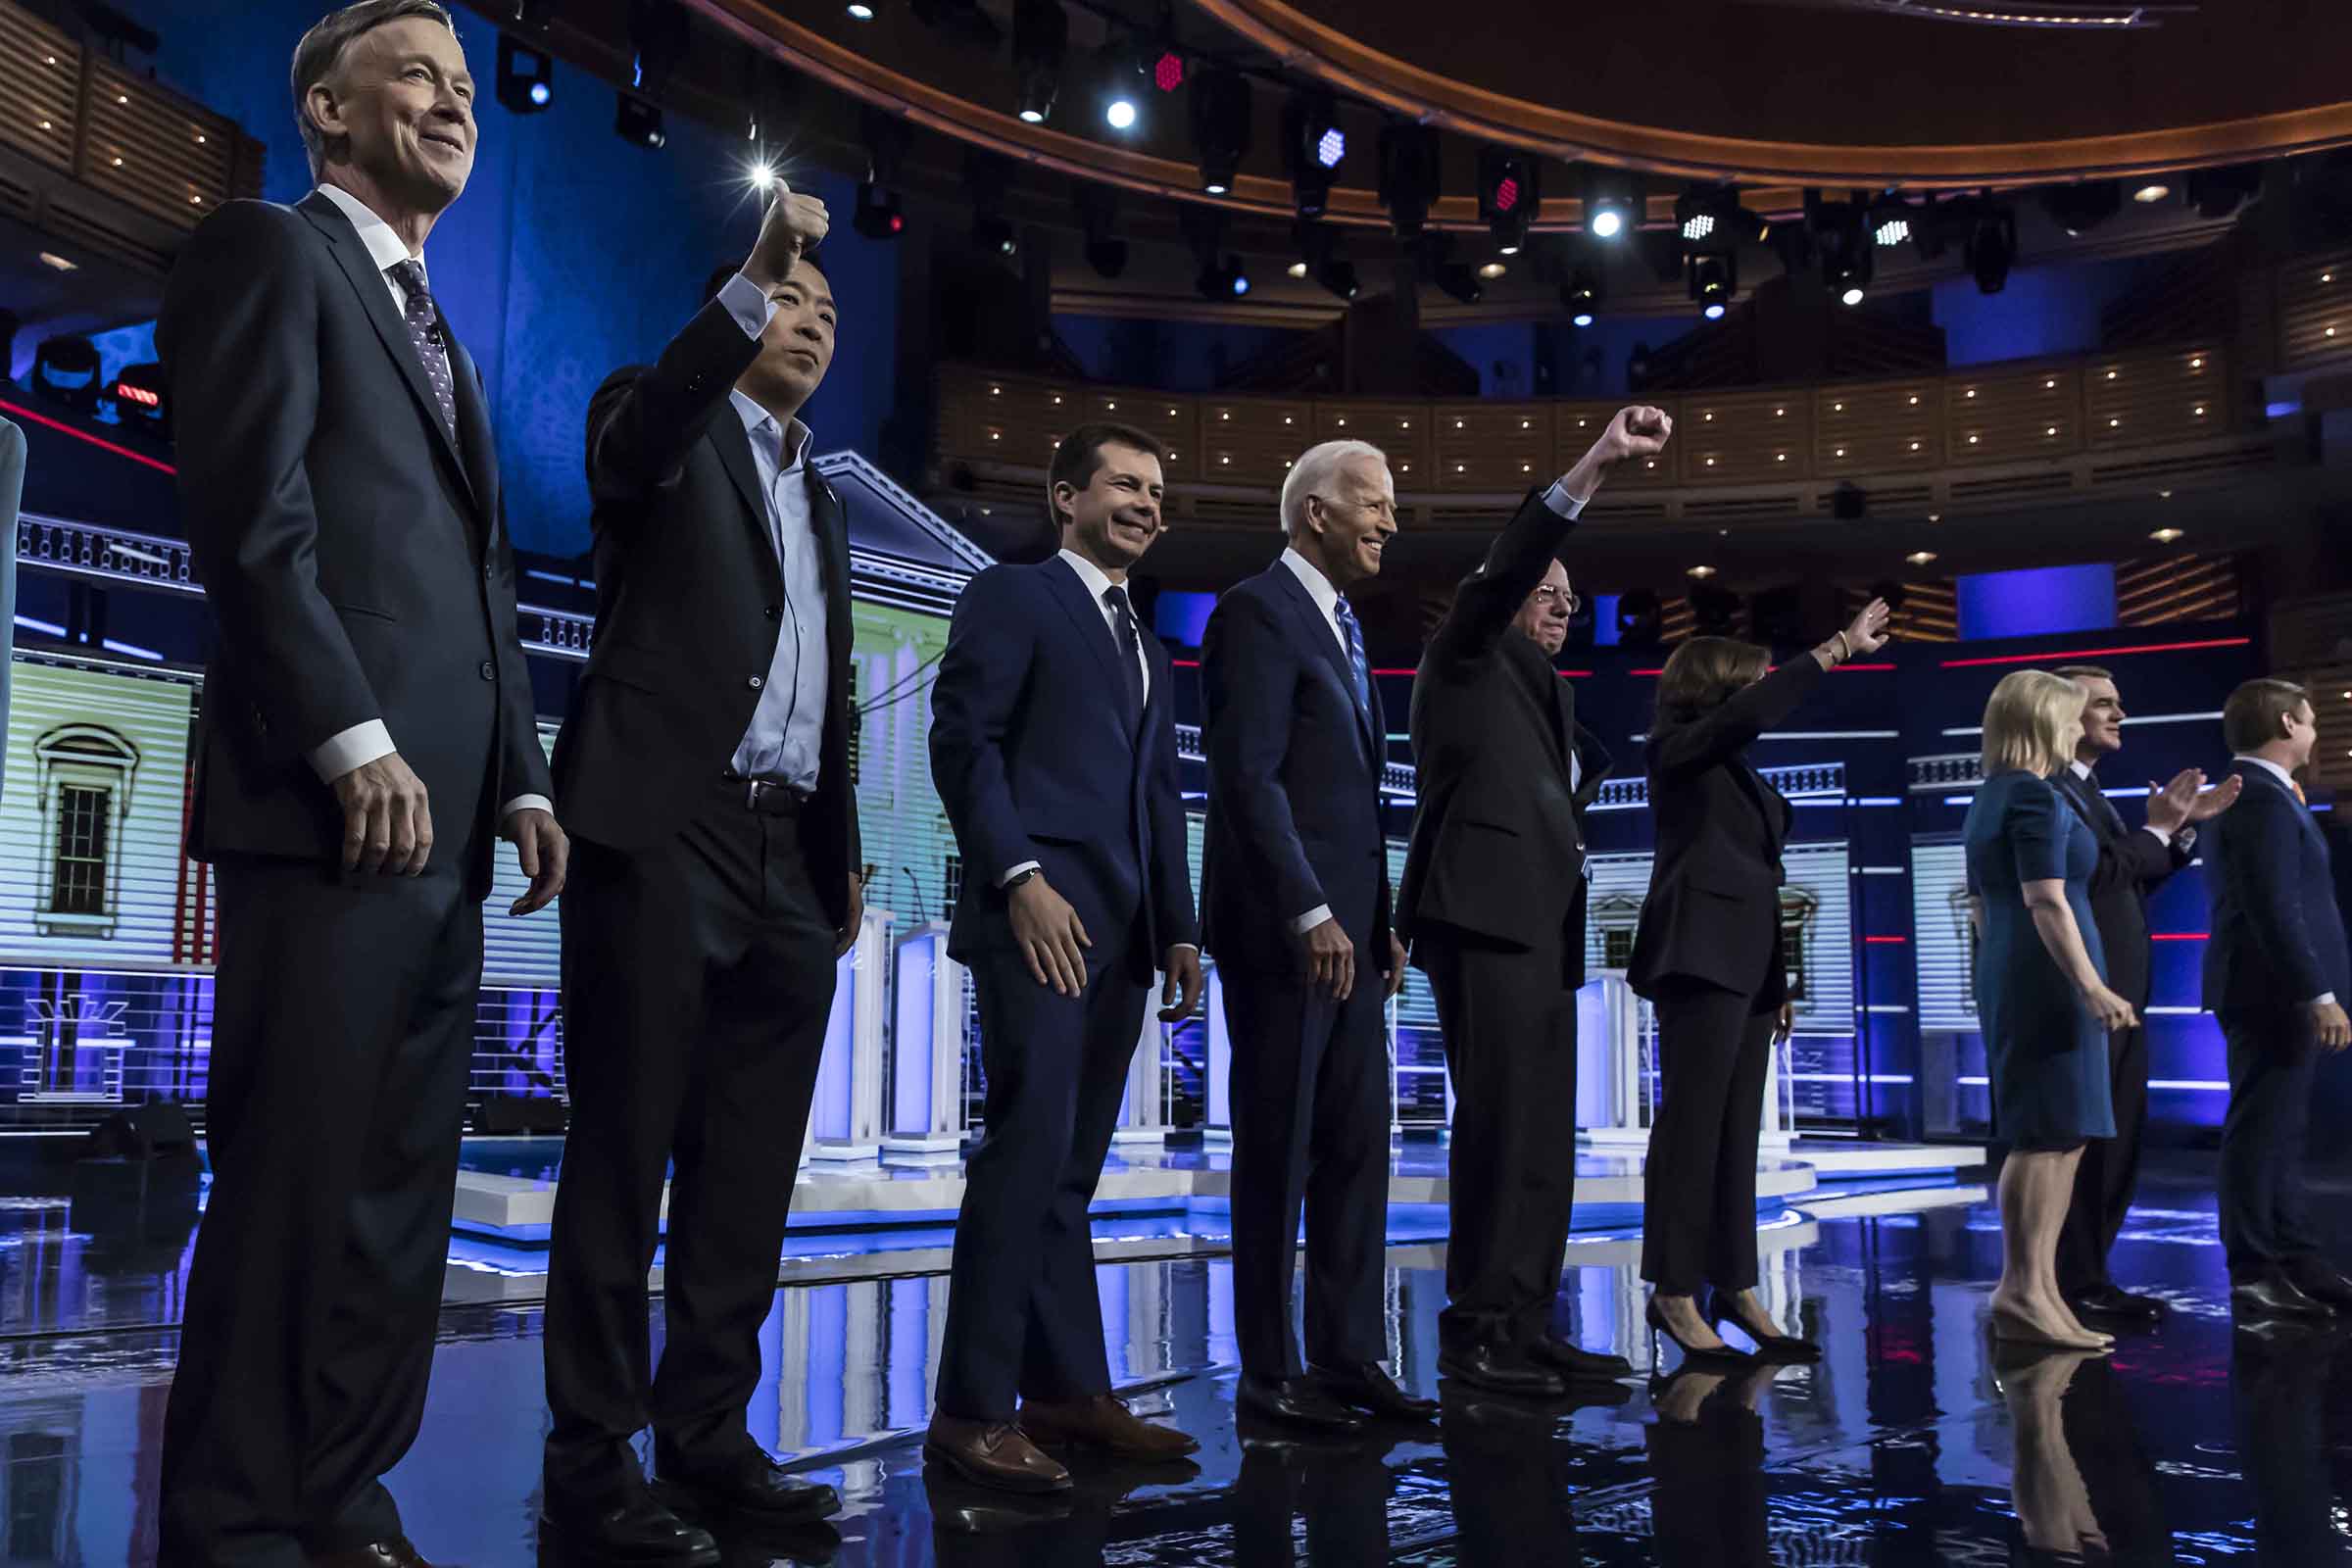 Second night for the first Debates,  for the 2020 U.S. Presidential Elections.